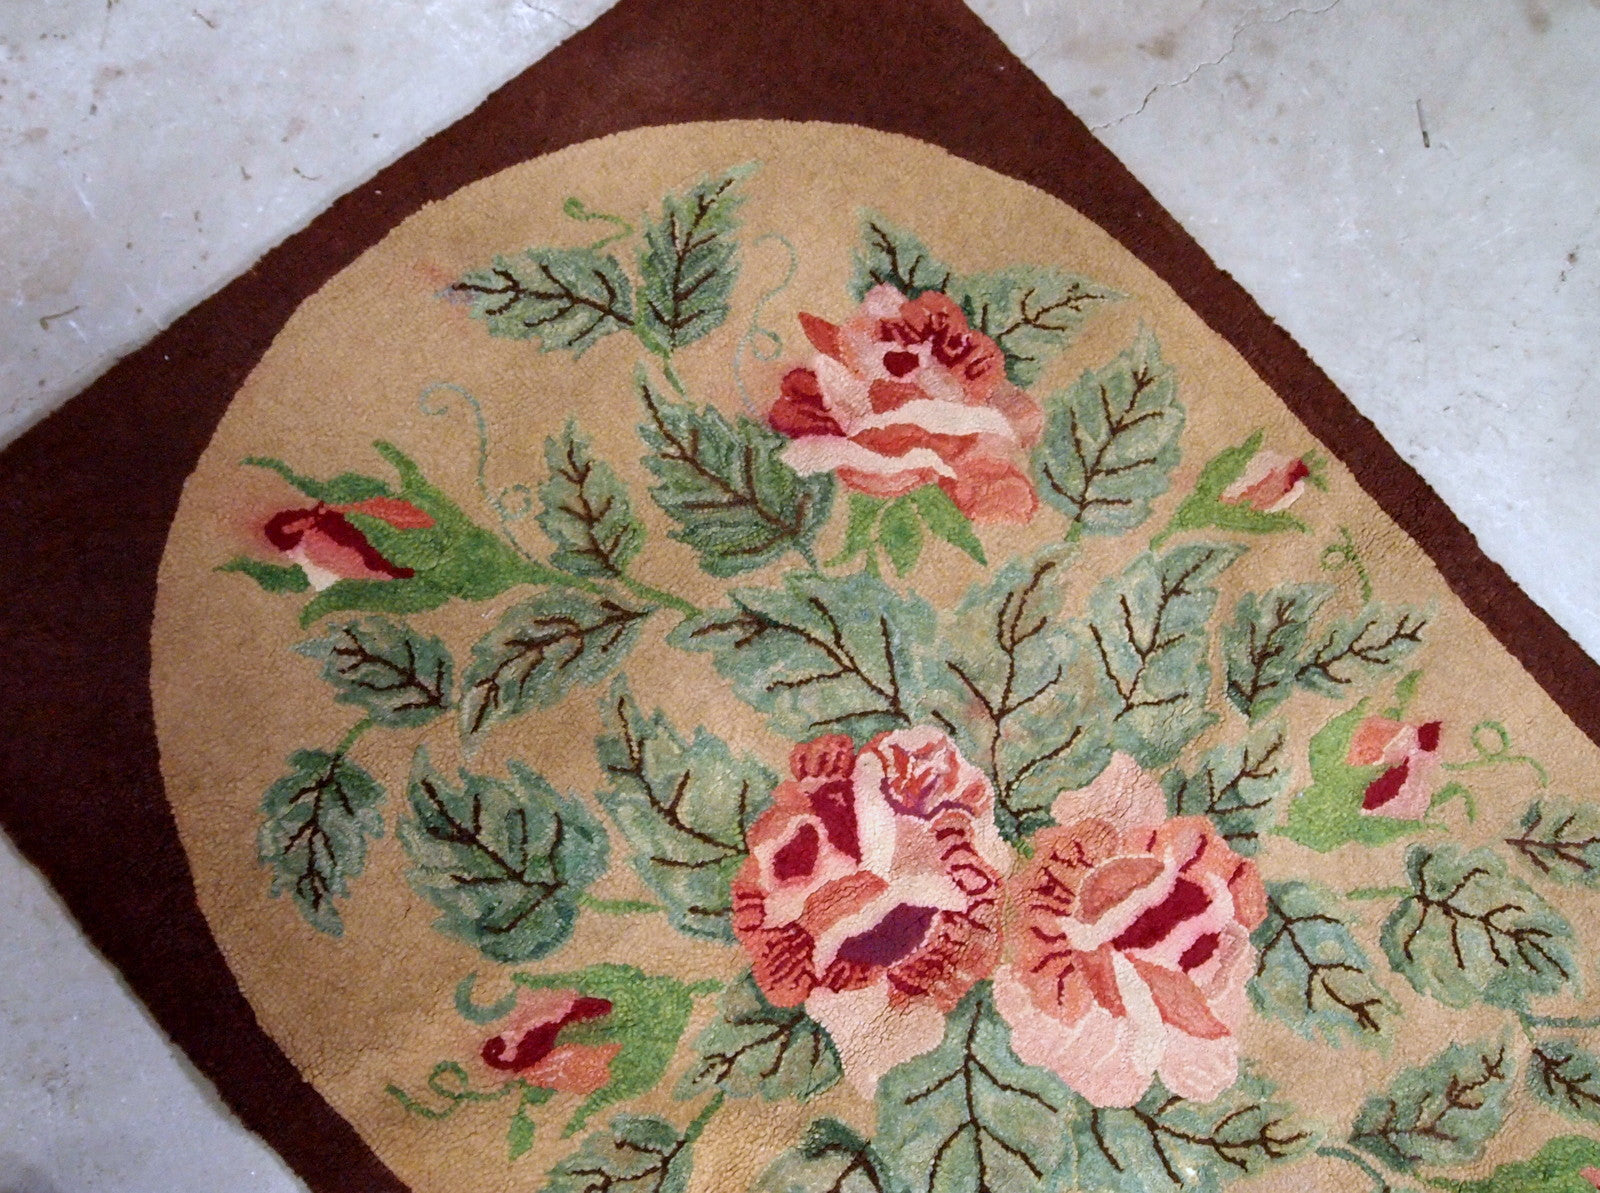 Handmade antique American Hooked rug with red roses. The rug is from the beginning of 20th century and in good condition.